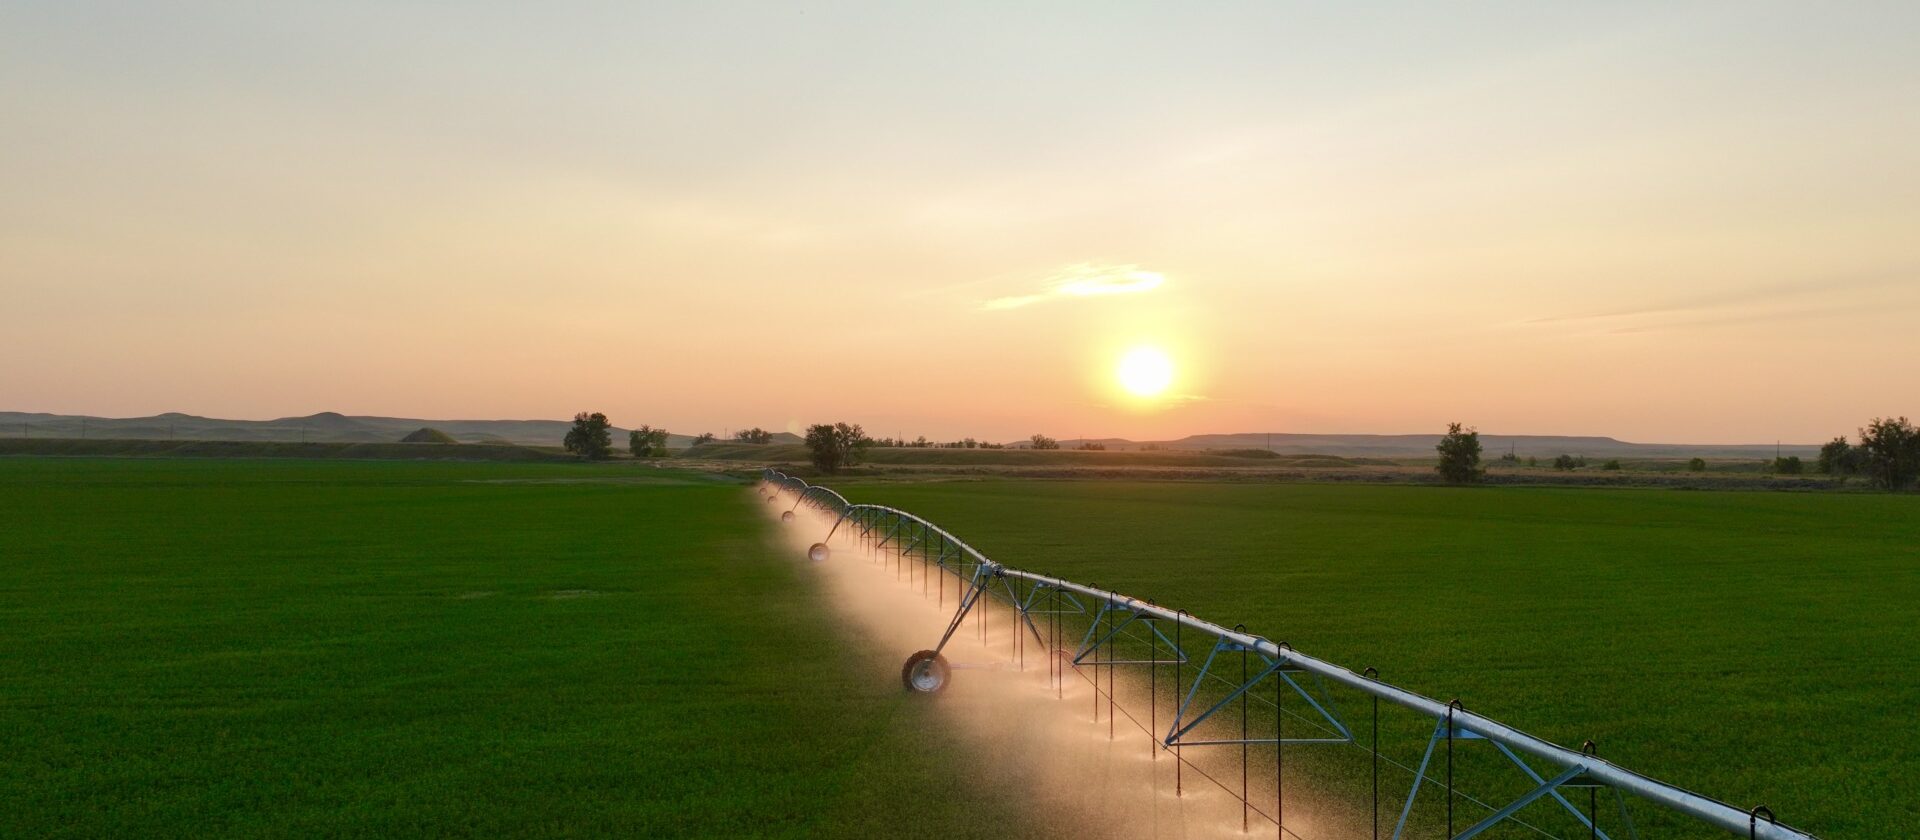 A field sprinkler in a green field at sunset